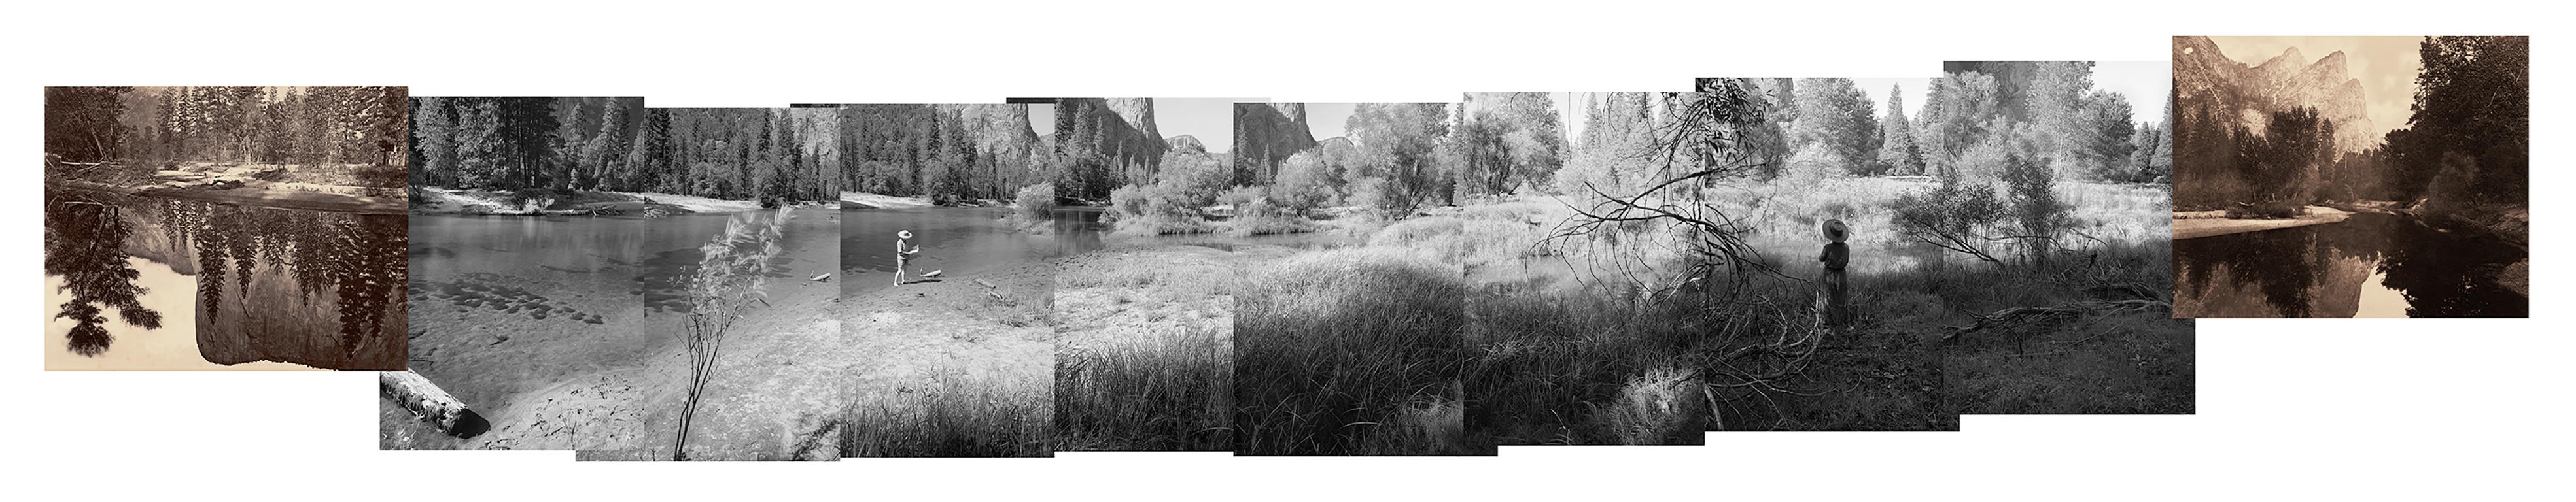 Mark Klett Landscape Photograph - Panorama of a Ghost River